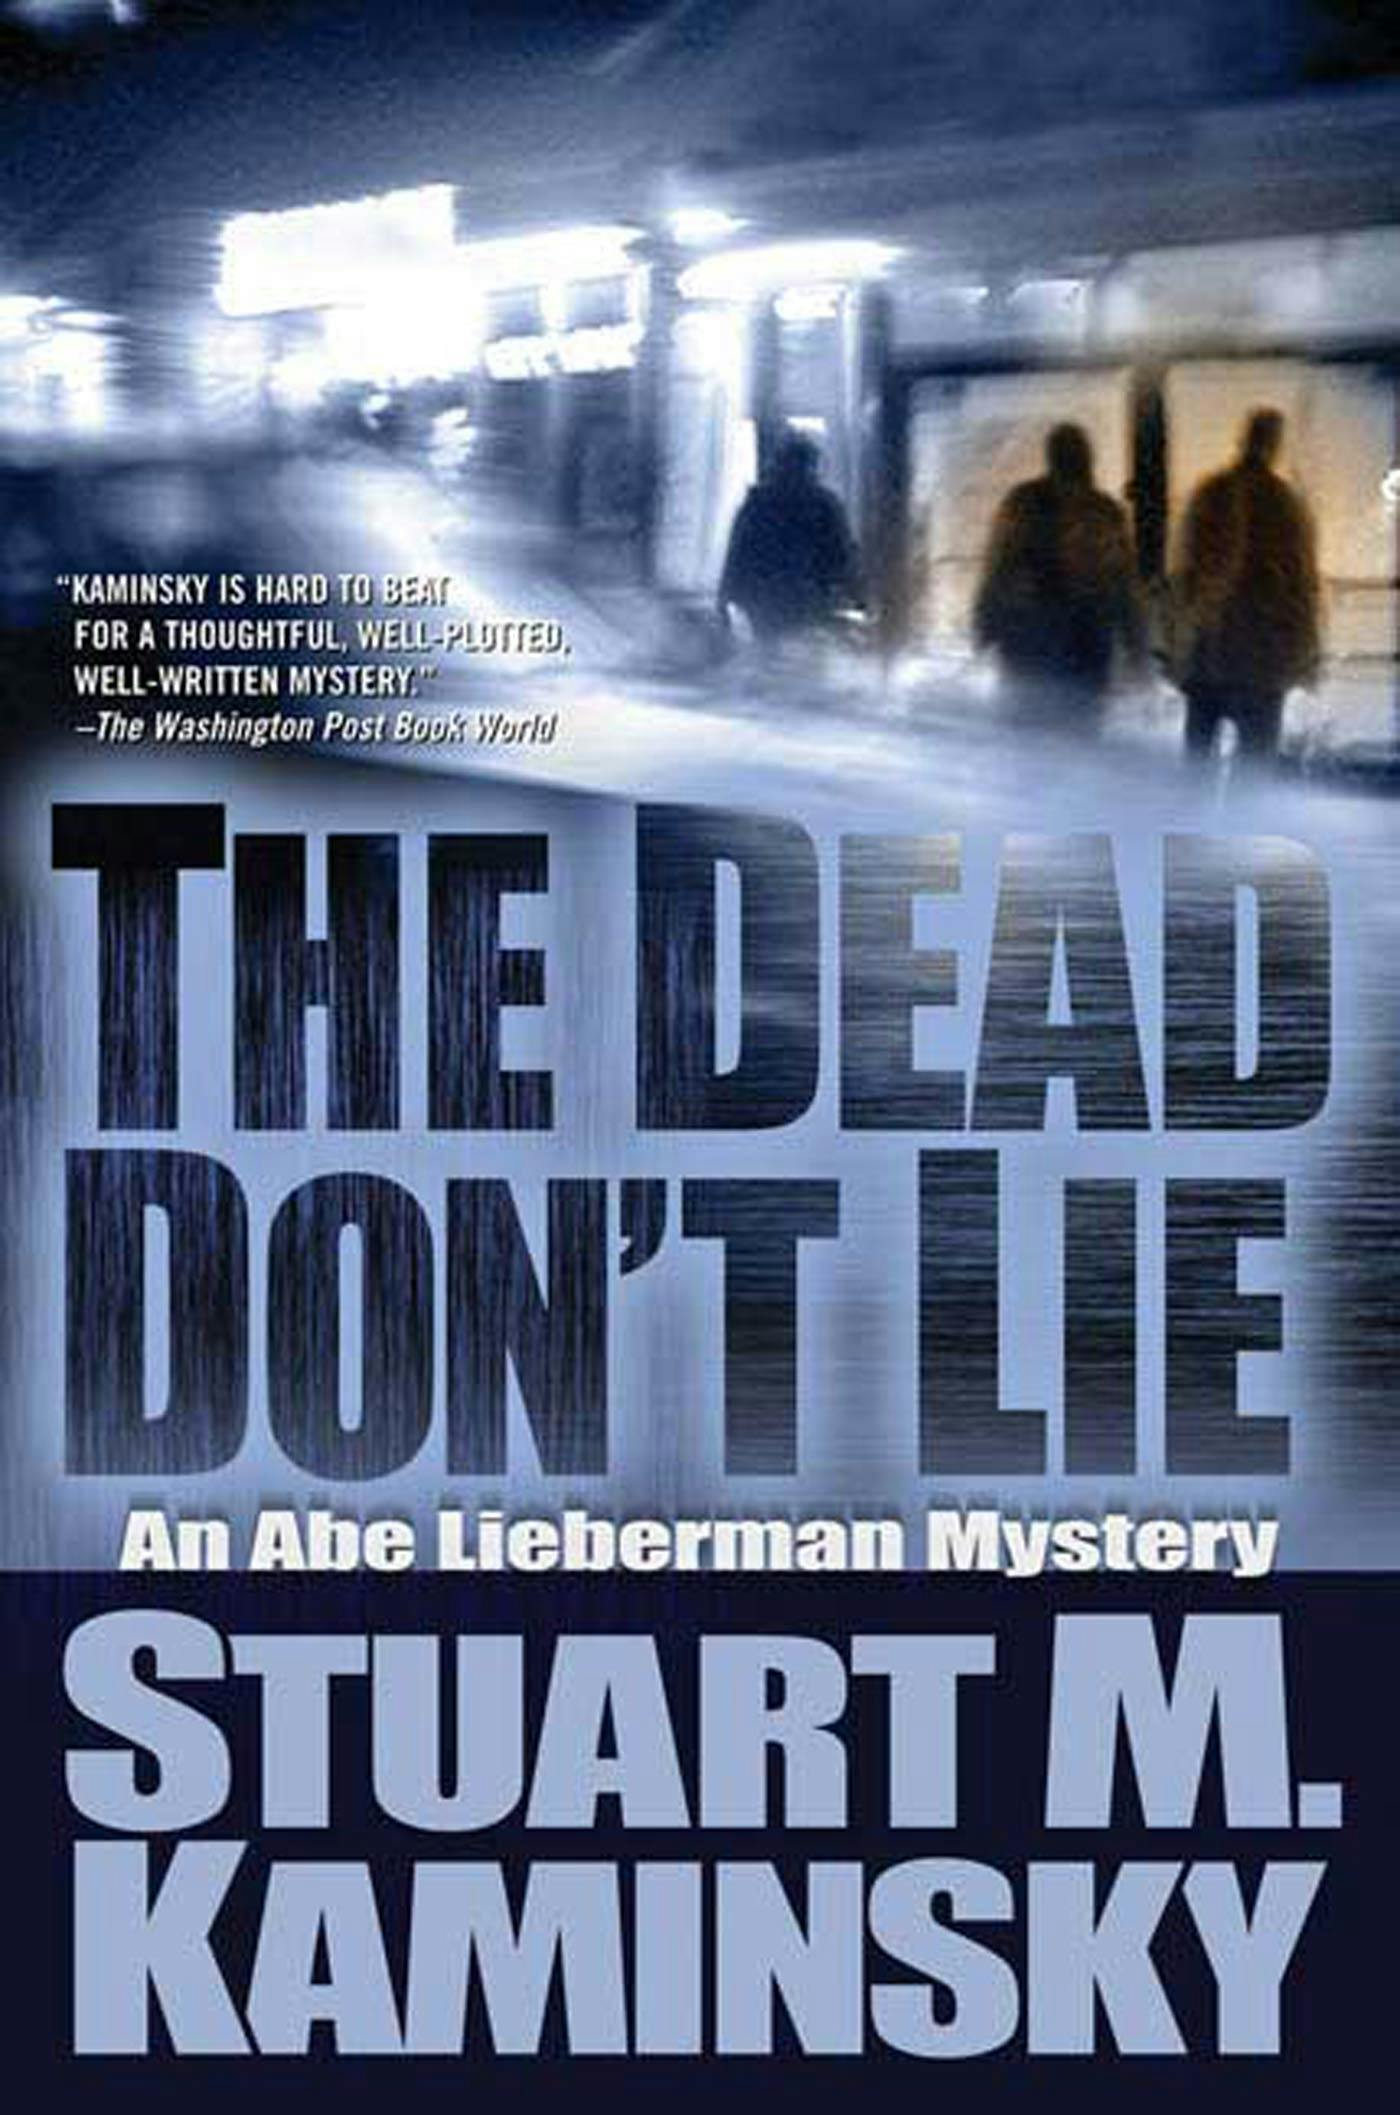 Cover for the book titled as: The Dead Don't Lie